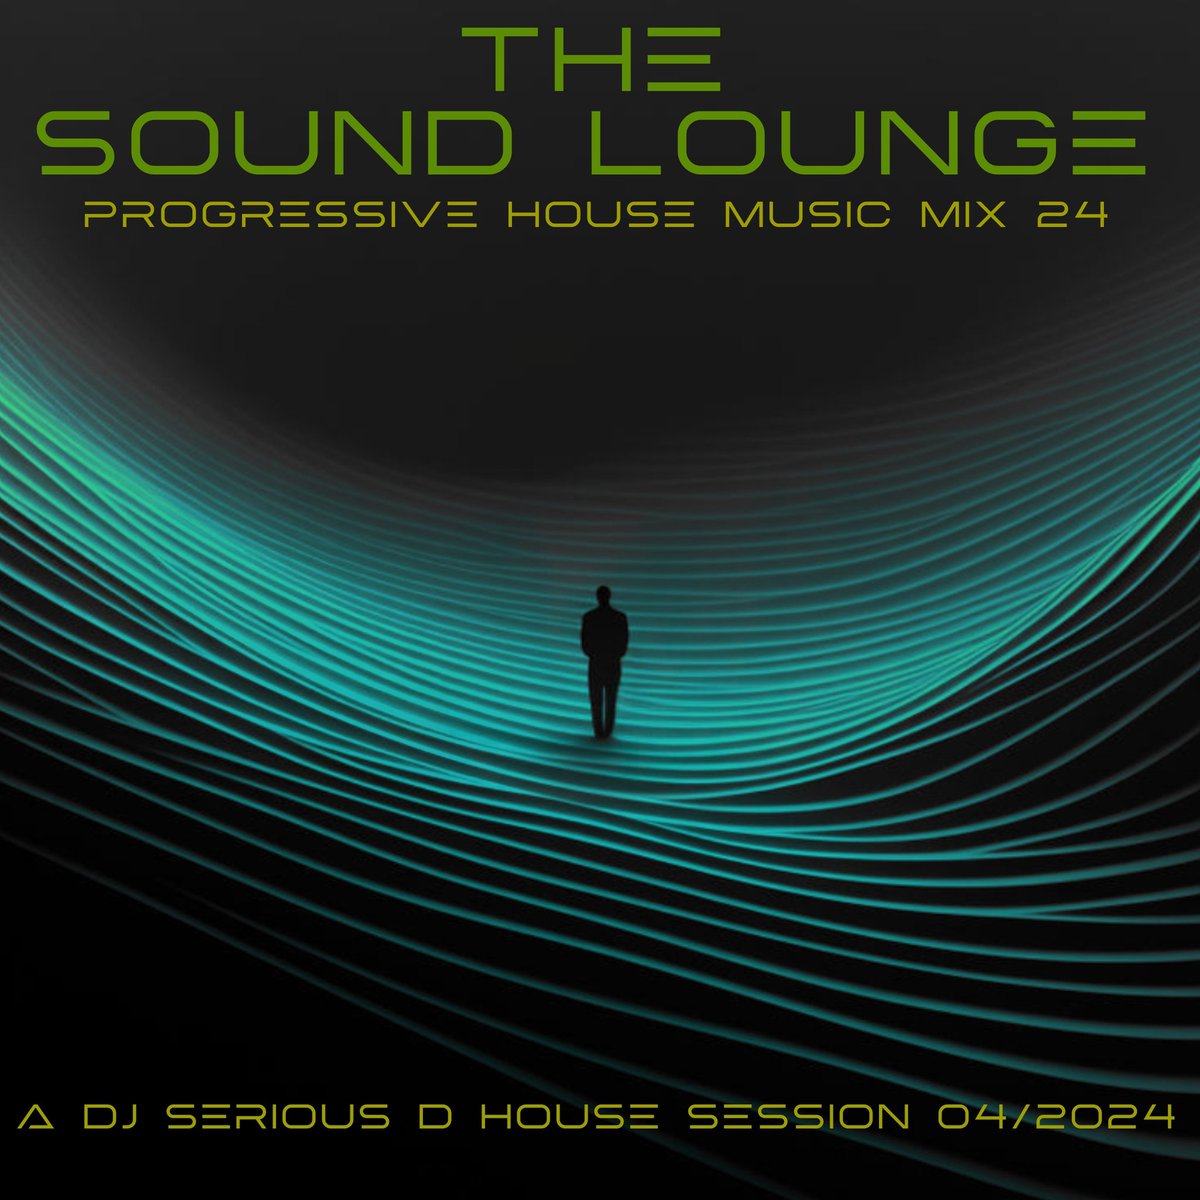 #dancemusic fans check out the Sound Lounge my nu #progressivehouse mix just ready for you! 👇🧞🎶 #djseriousd #djmixes #housemusic #coolvibes #electronicmusic #djmix #NowPlaying #musictwt #music #MusicIsLife #日本人 #友人 #ハウスミュージック #音楽 👇❤️🎧🏠🎶…